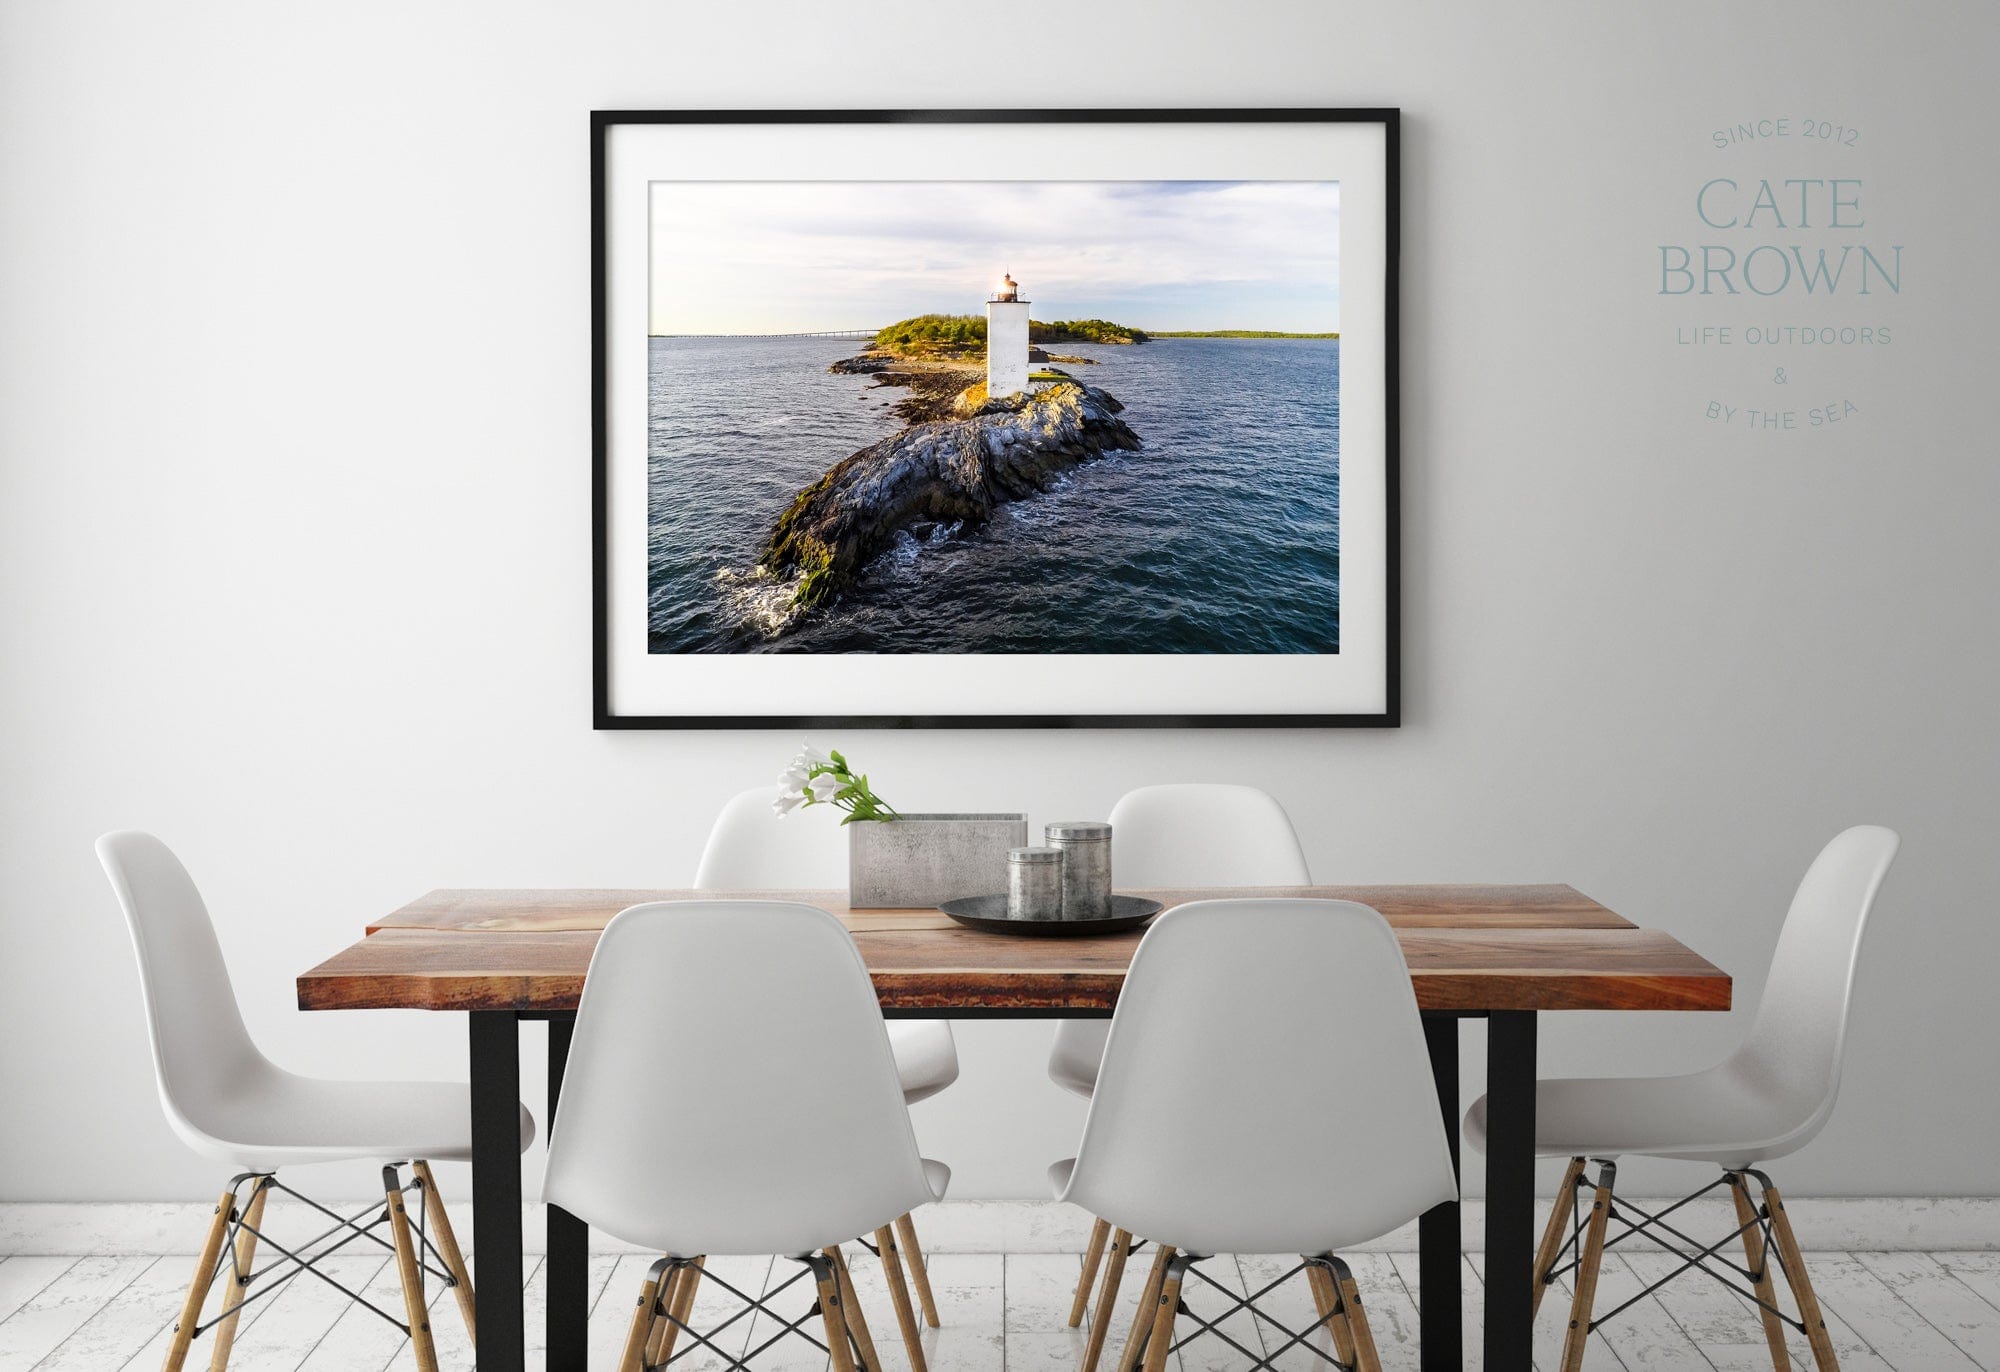 Cate Brown Photo Fine Art Print / 8"x12" / None (Print Only) Dutch Island Light #2   //  Aerial Photography Made to Order Ocean Fine Art